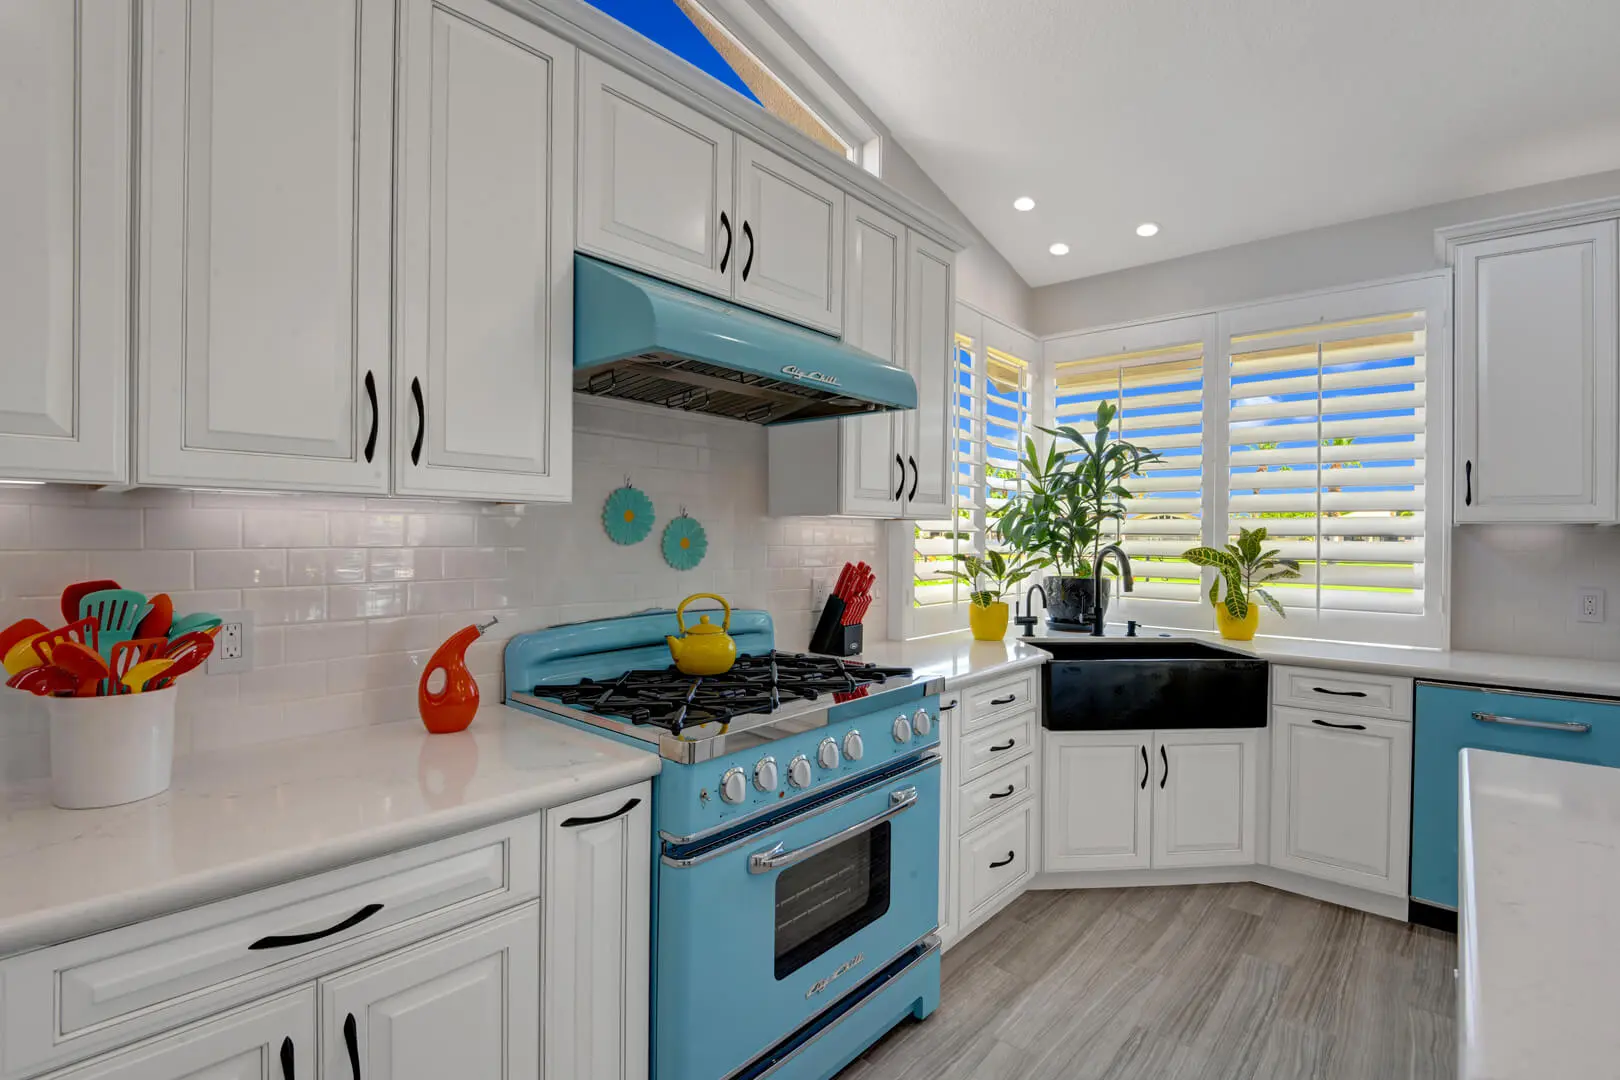 A kitchen with white cabinets and blue oven.